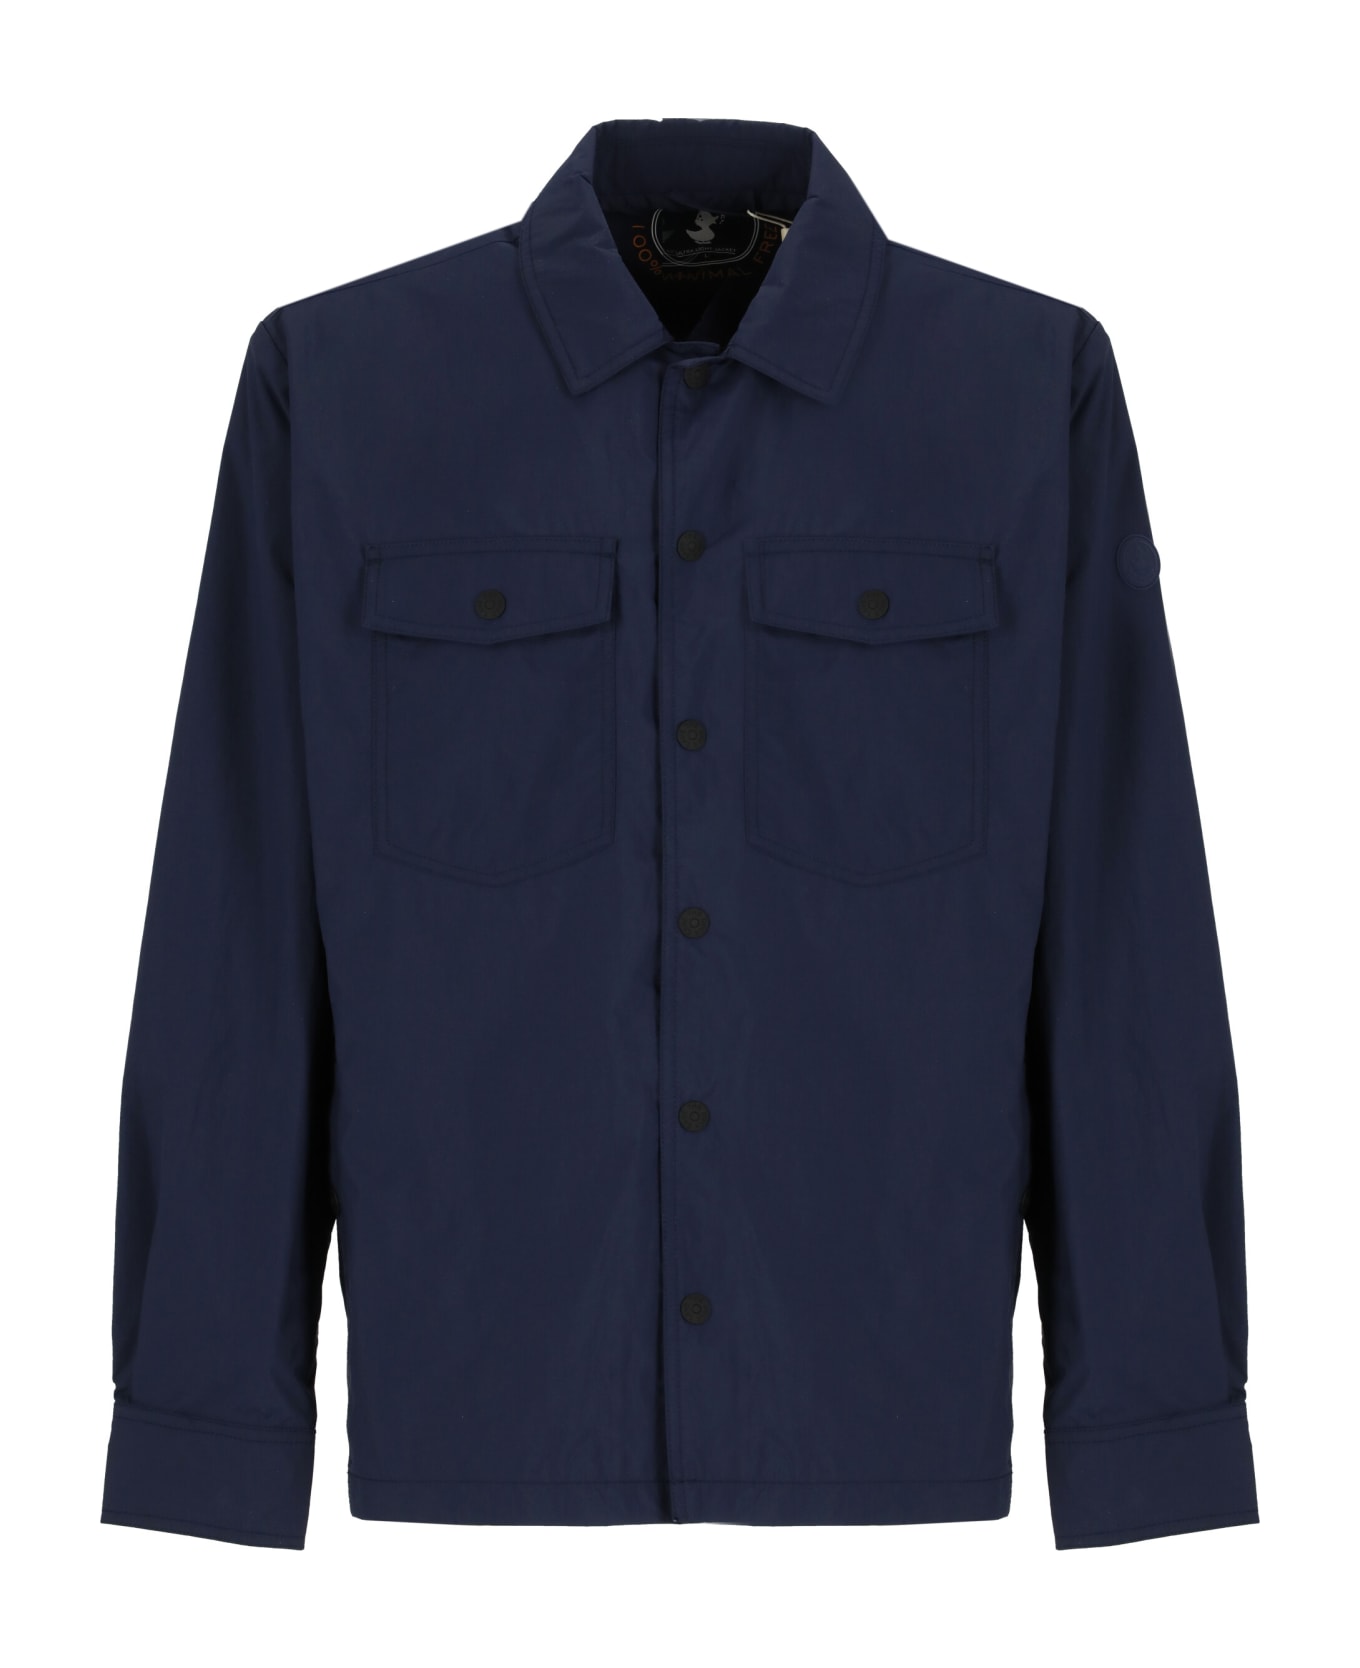 Save the Duck Kendri Jacket - Blue ブレザー